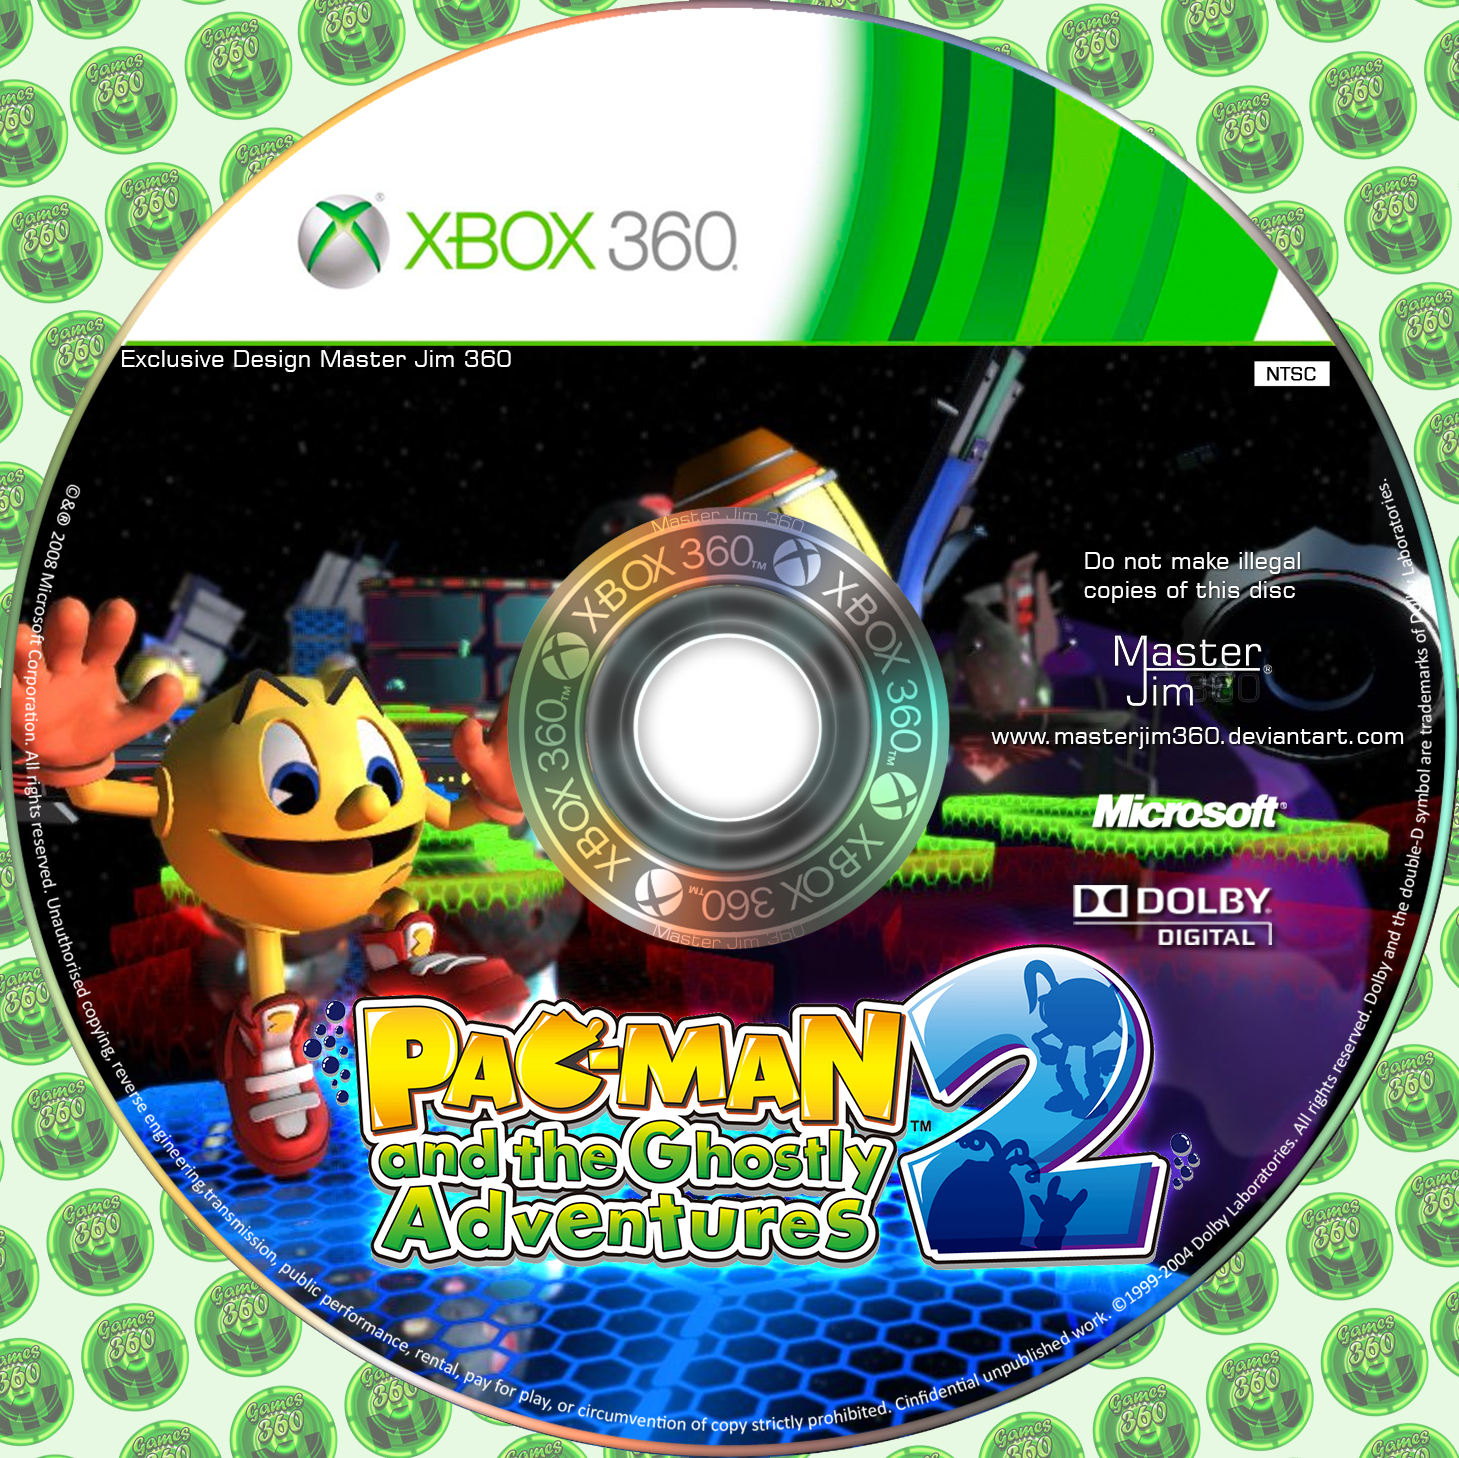 PAC-MAN and the Ghostly Adventures 2 ( Xbox 360 )